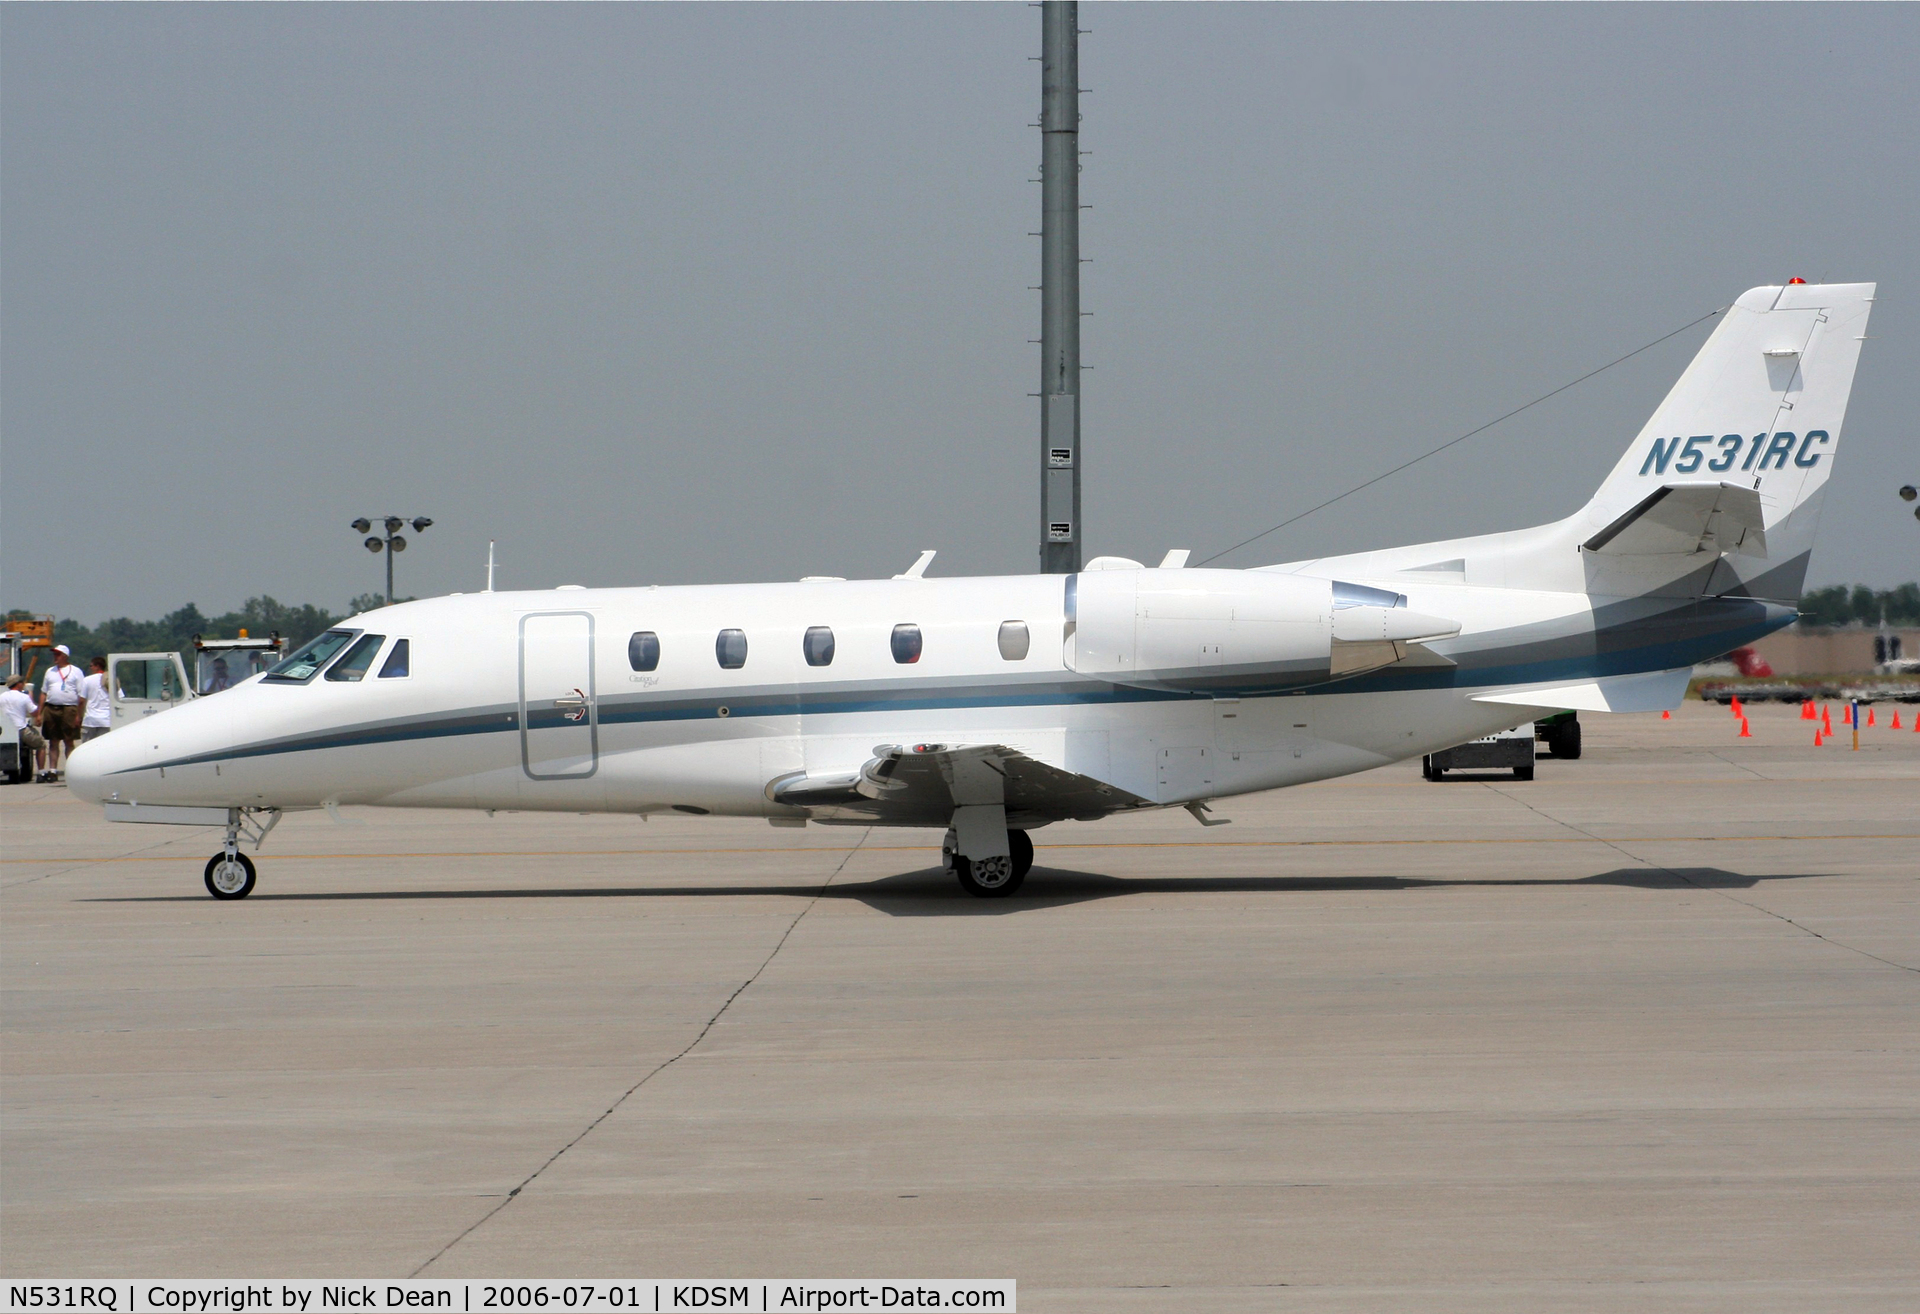 N531RQ, 2001 Cessna 560XL Citation Excel C/N 560-5184, KDSM (Seen here as N531RC this airframe is currently registered N531RQ as posted)